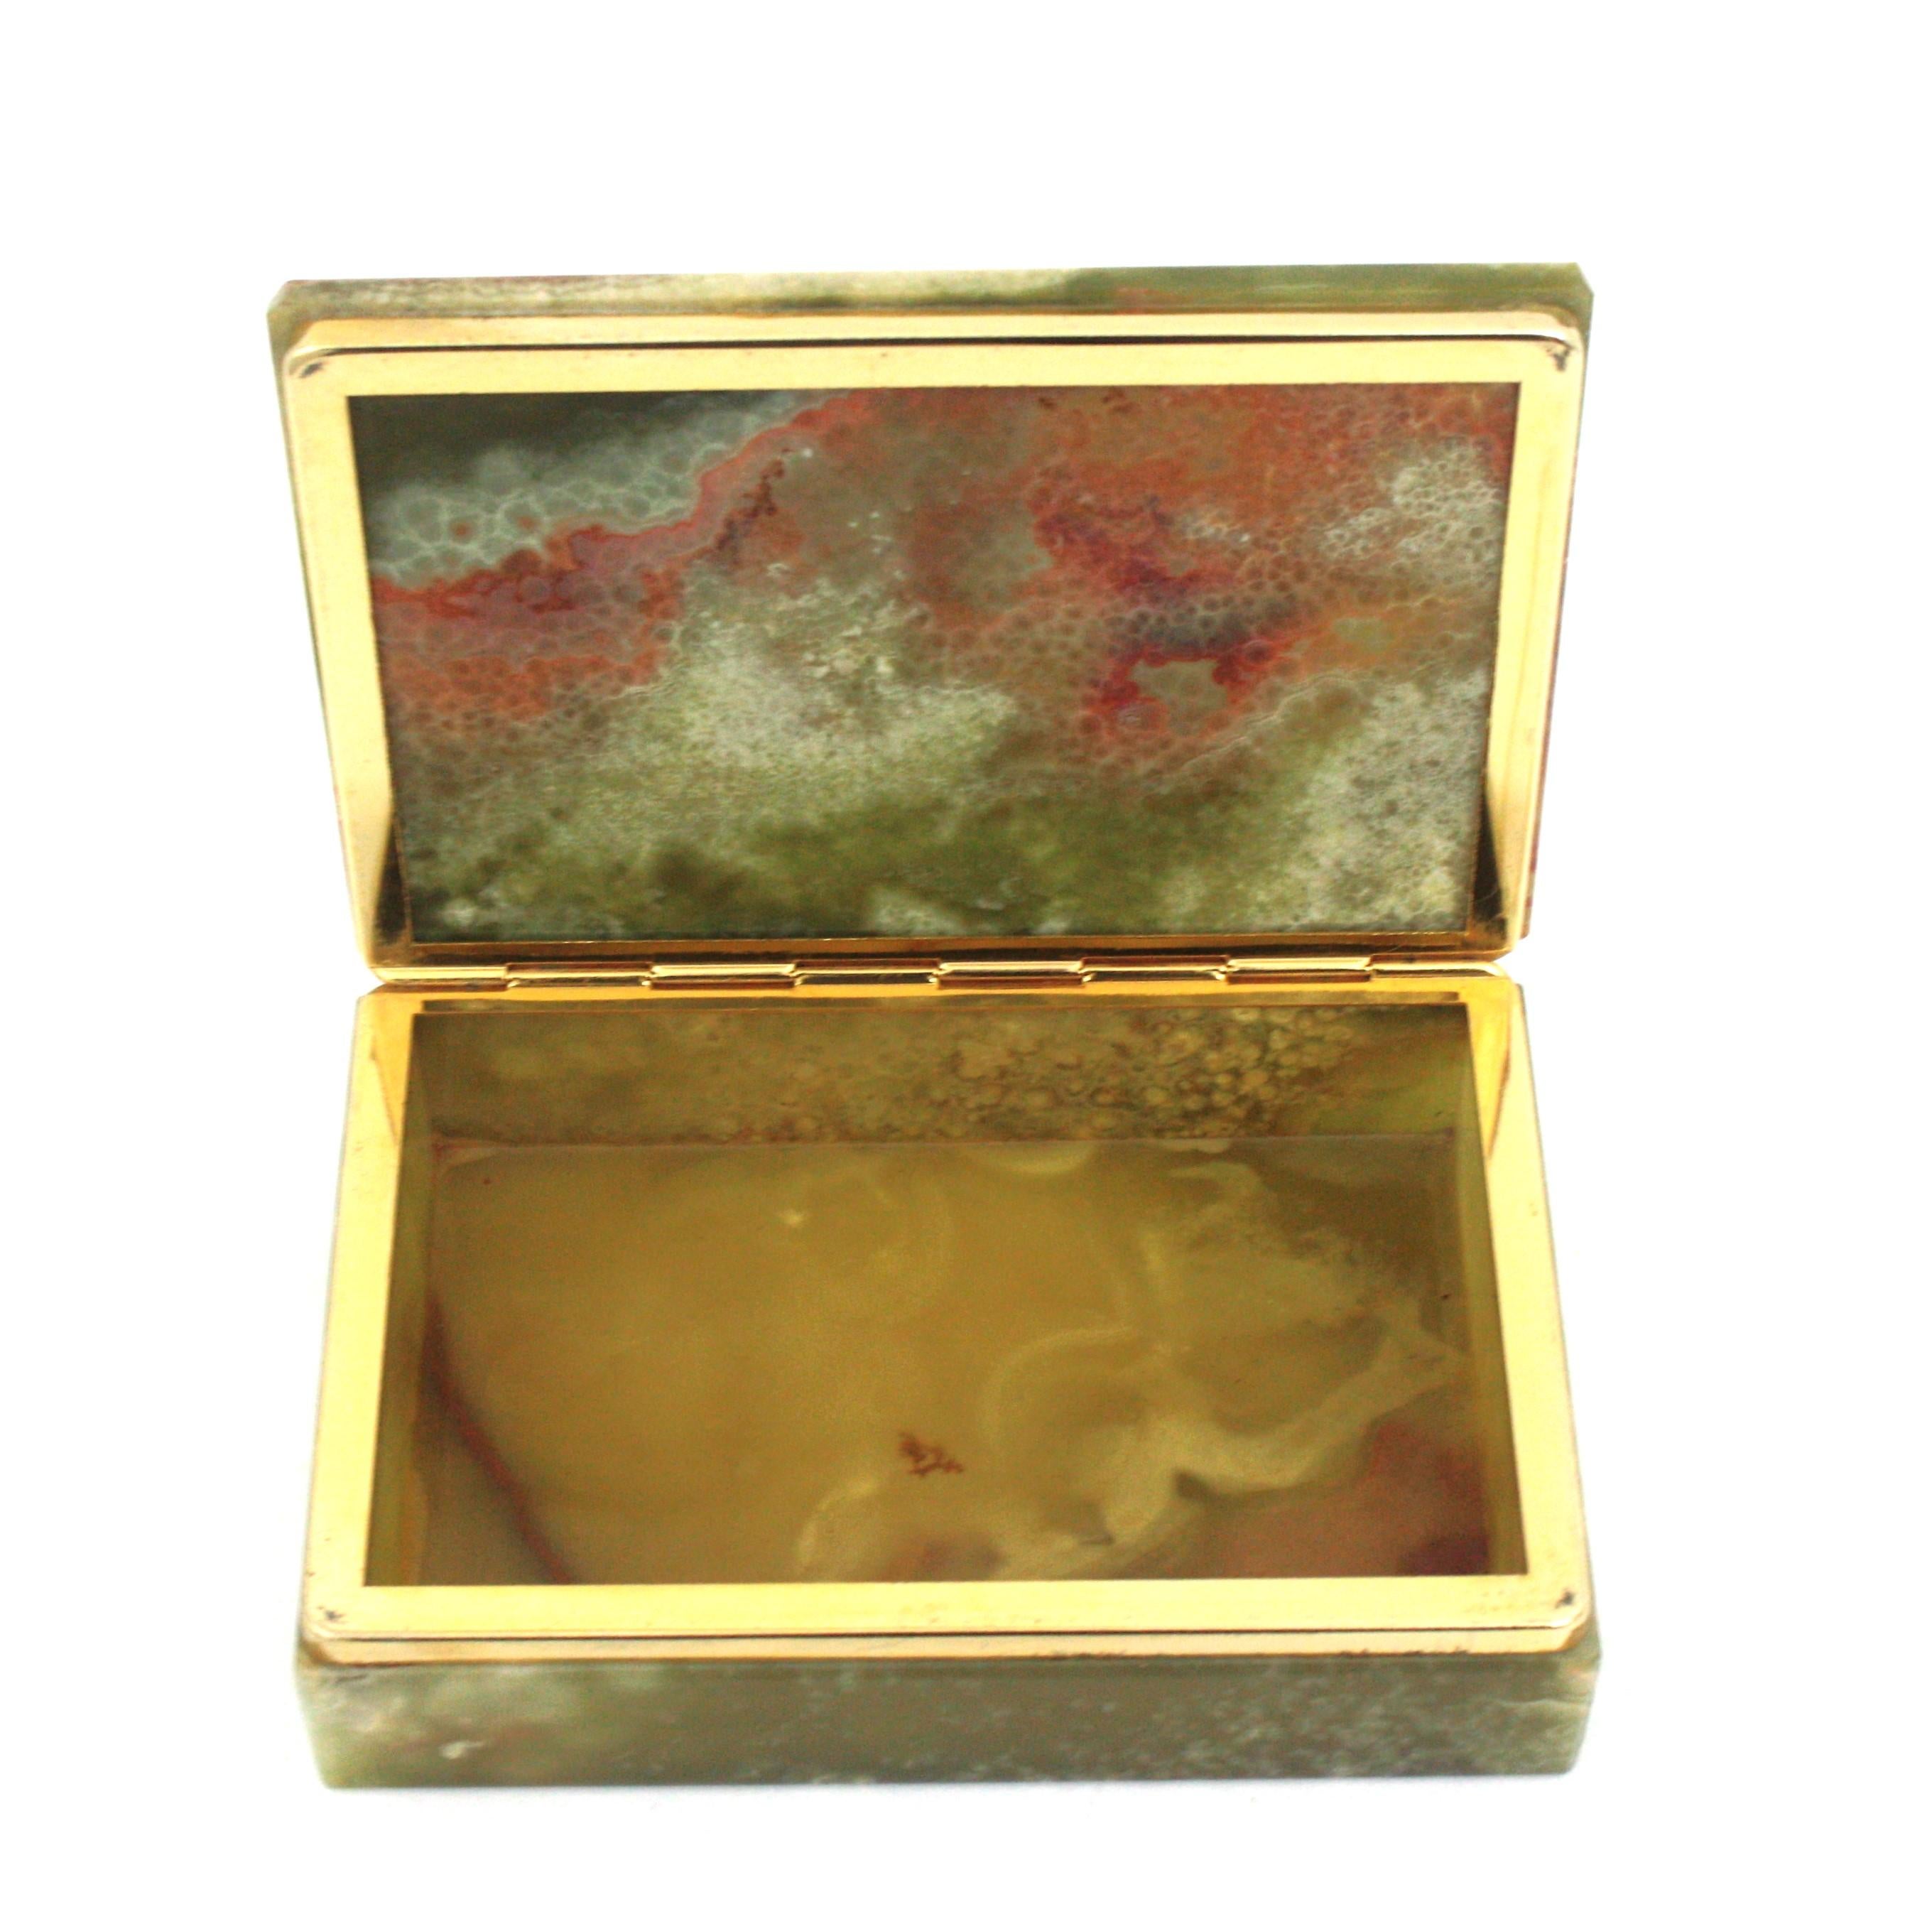 20th Century 1950s Onyx Mineral Stone Jewelry Box / Hinged Box For Sale